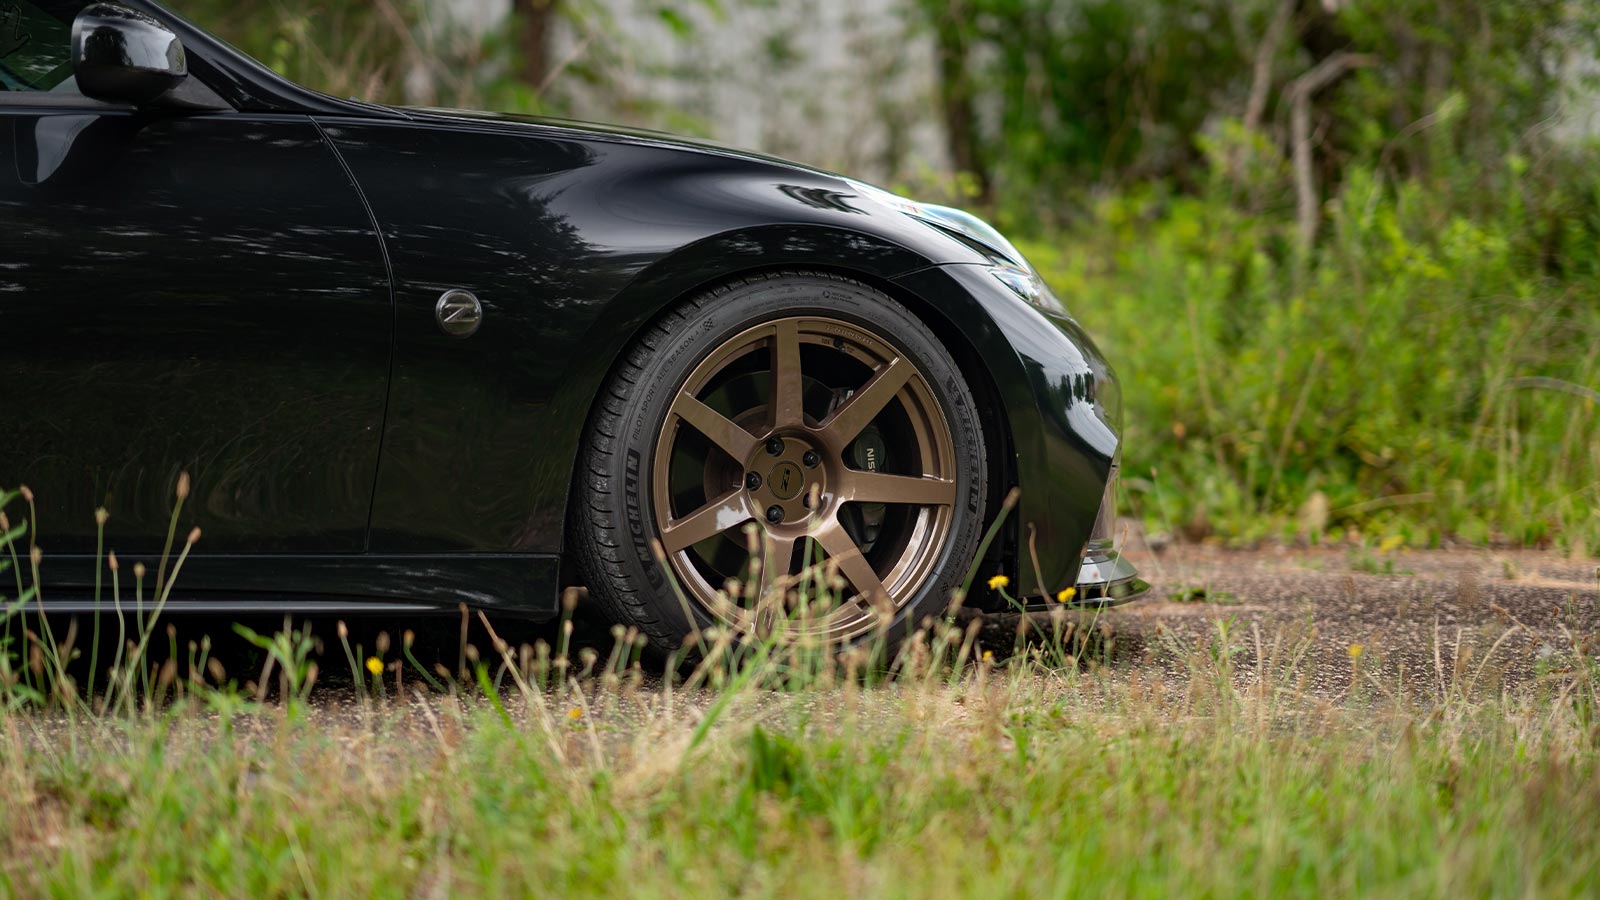 Wheel Packages Take the guesswork out of wheel shopping with the 370Z wheel package